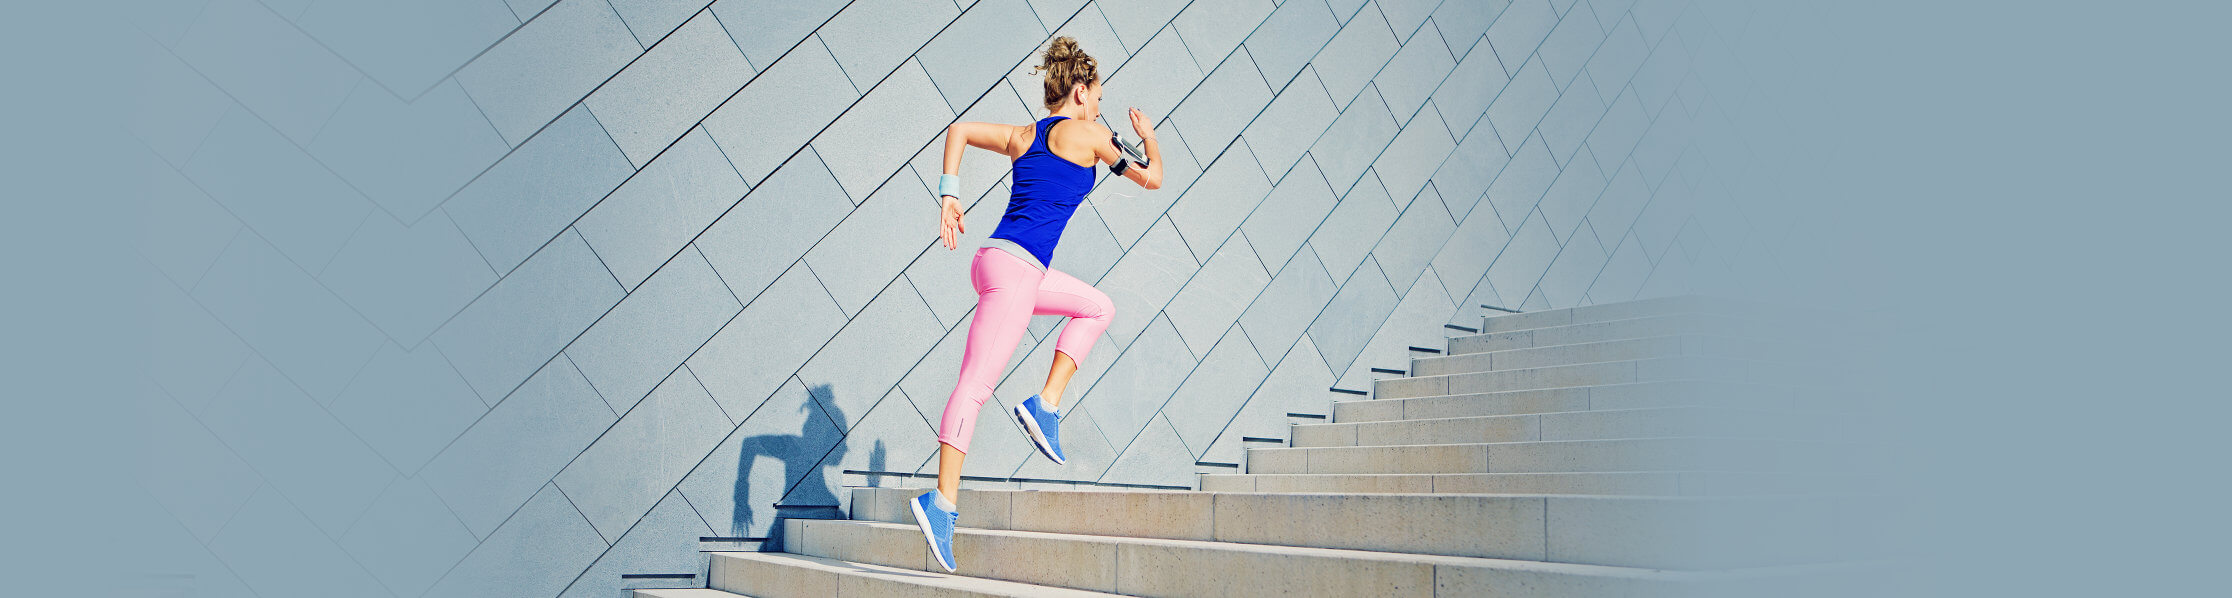 woman in running outfit jogging up a flight of stairs